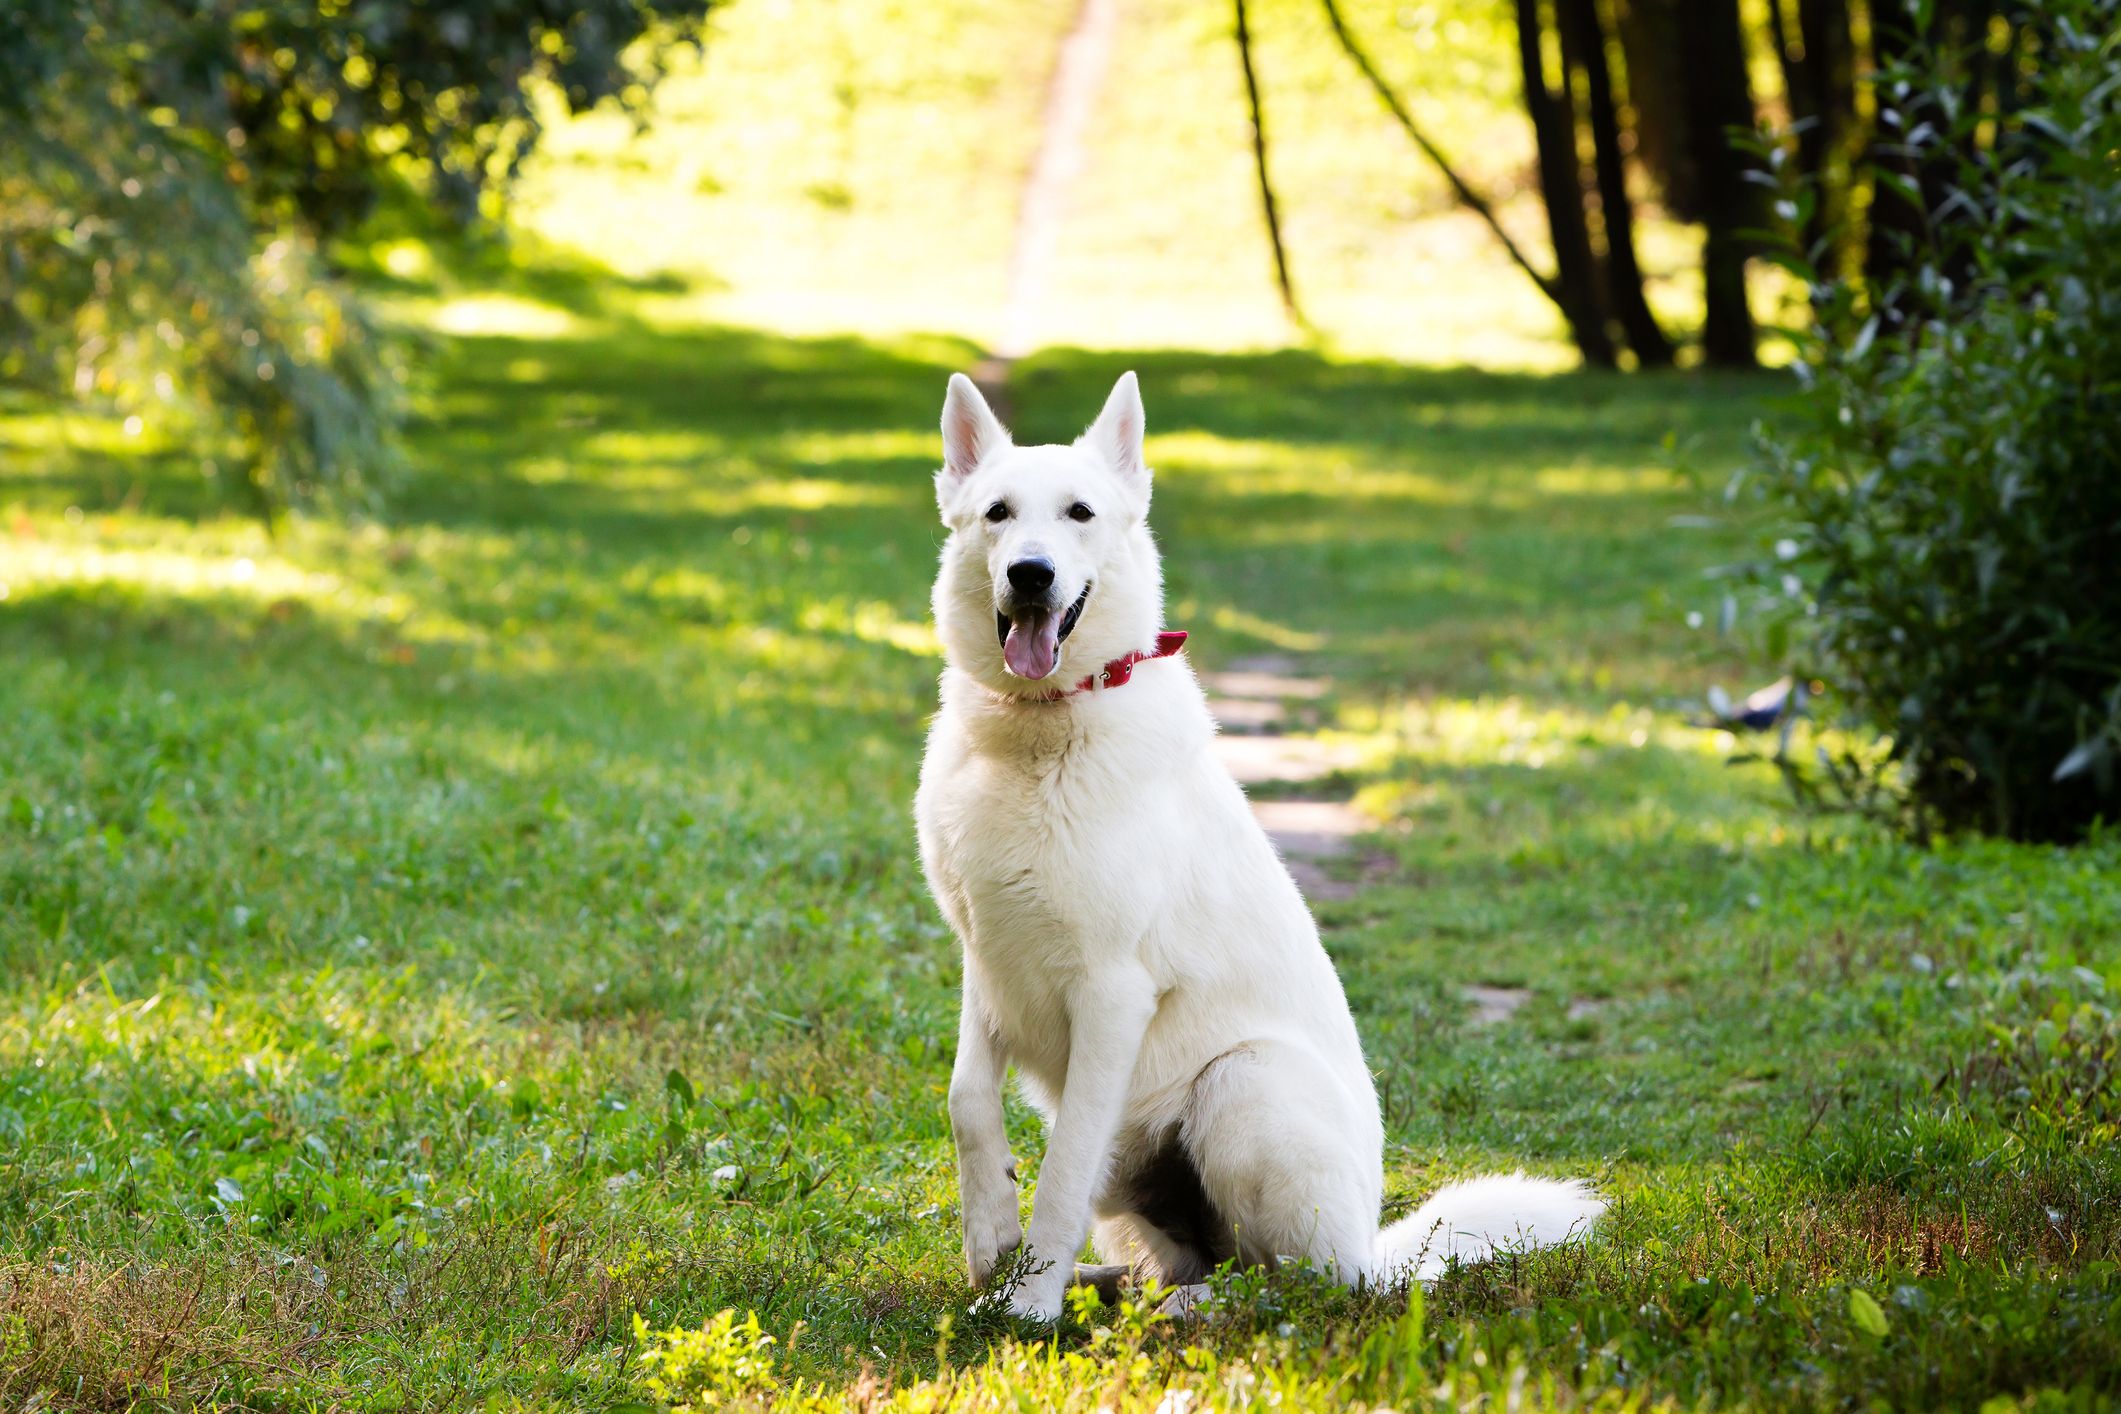 Premium White Swiss Shepherd Dogs Are Being Sold Off As Cheaper German Shepherd Puppies